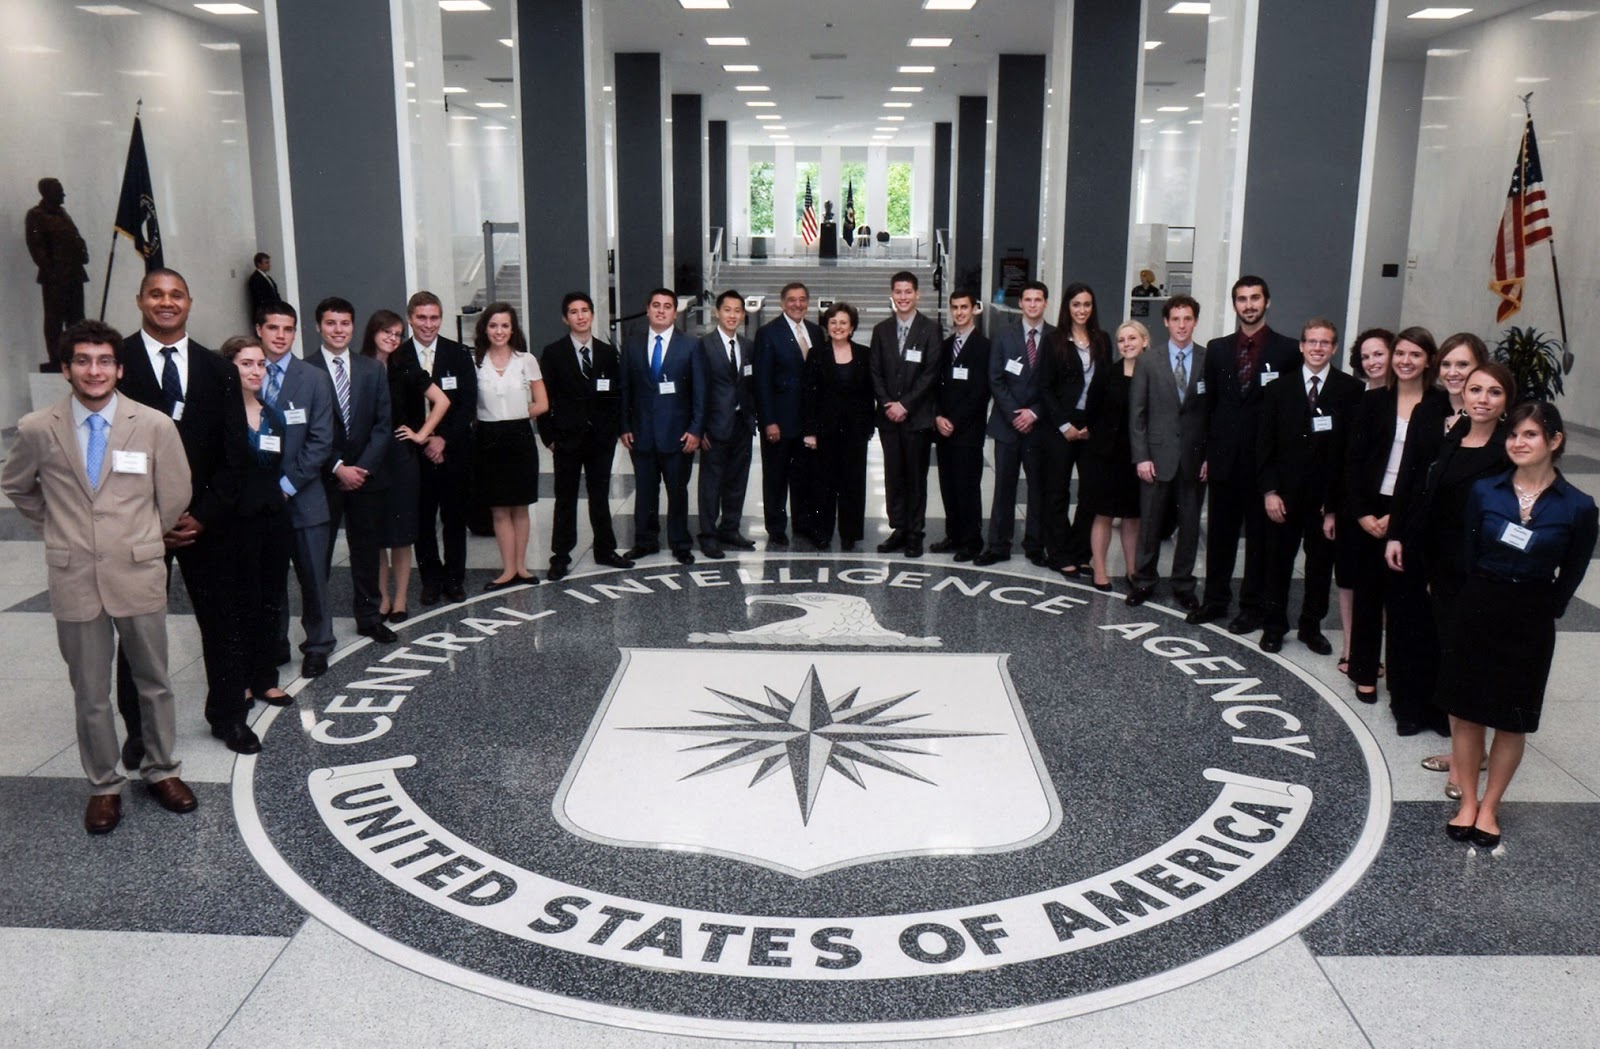 The CIA is hiring - on Social Networks